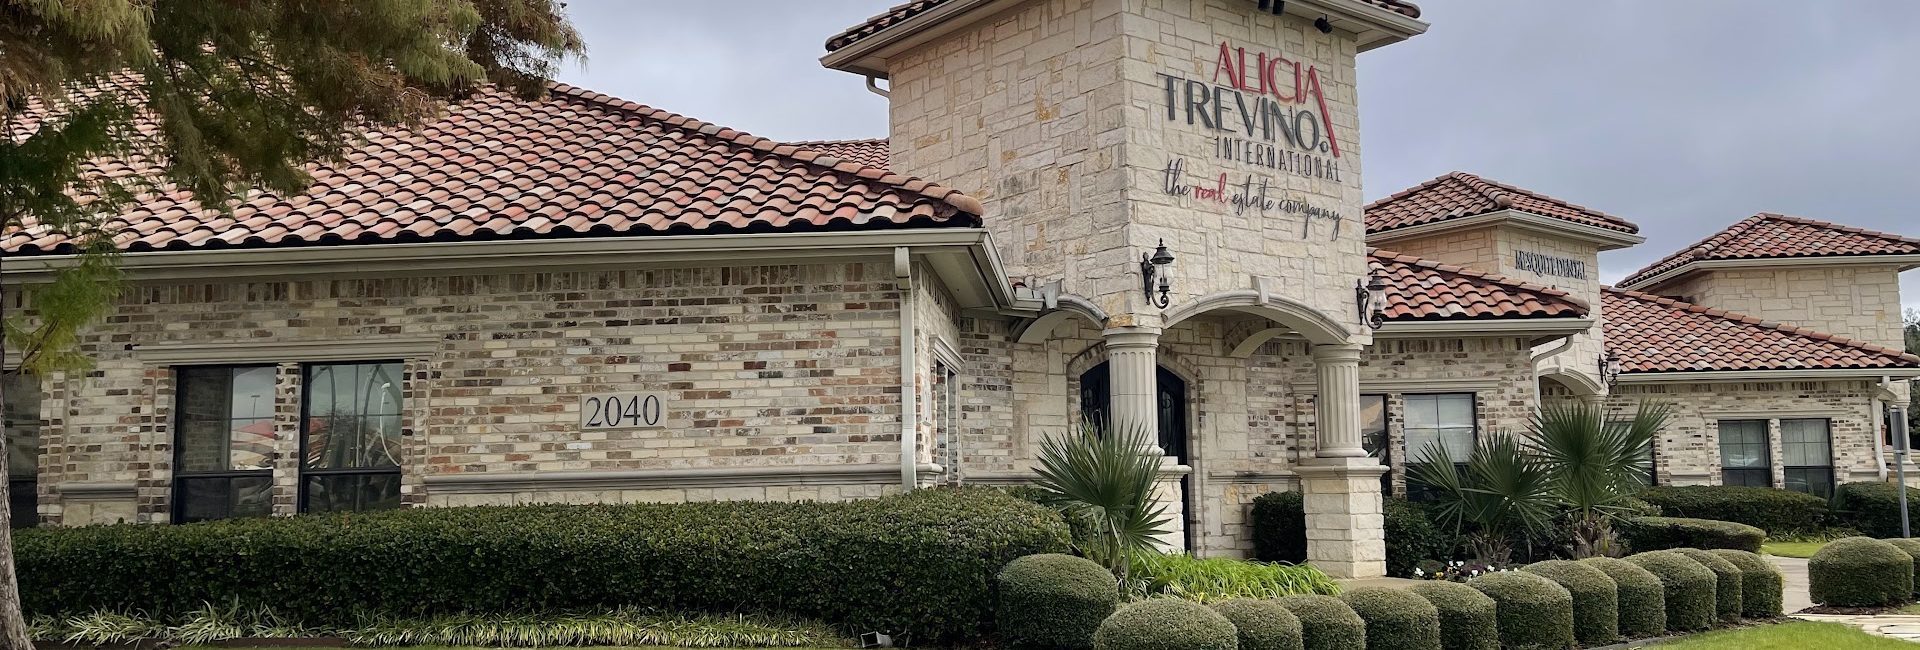 The Alicia Trevino Team brokered by eXp Realty 4